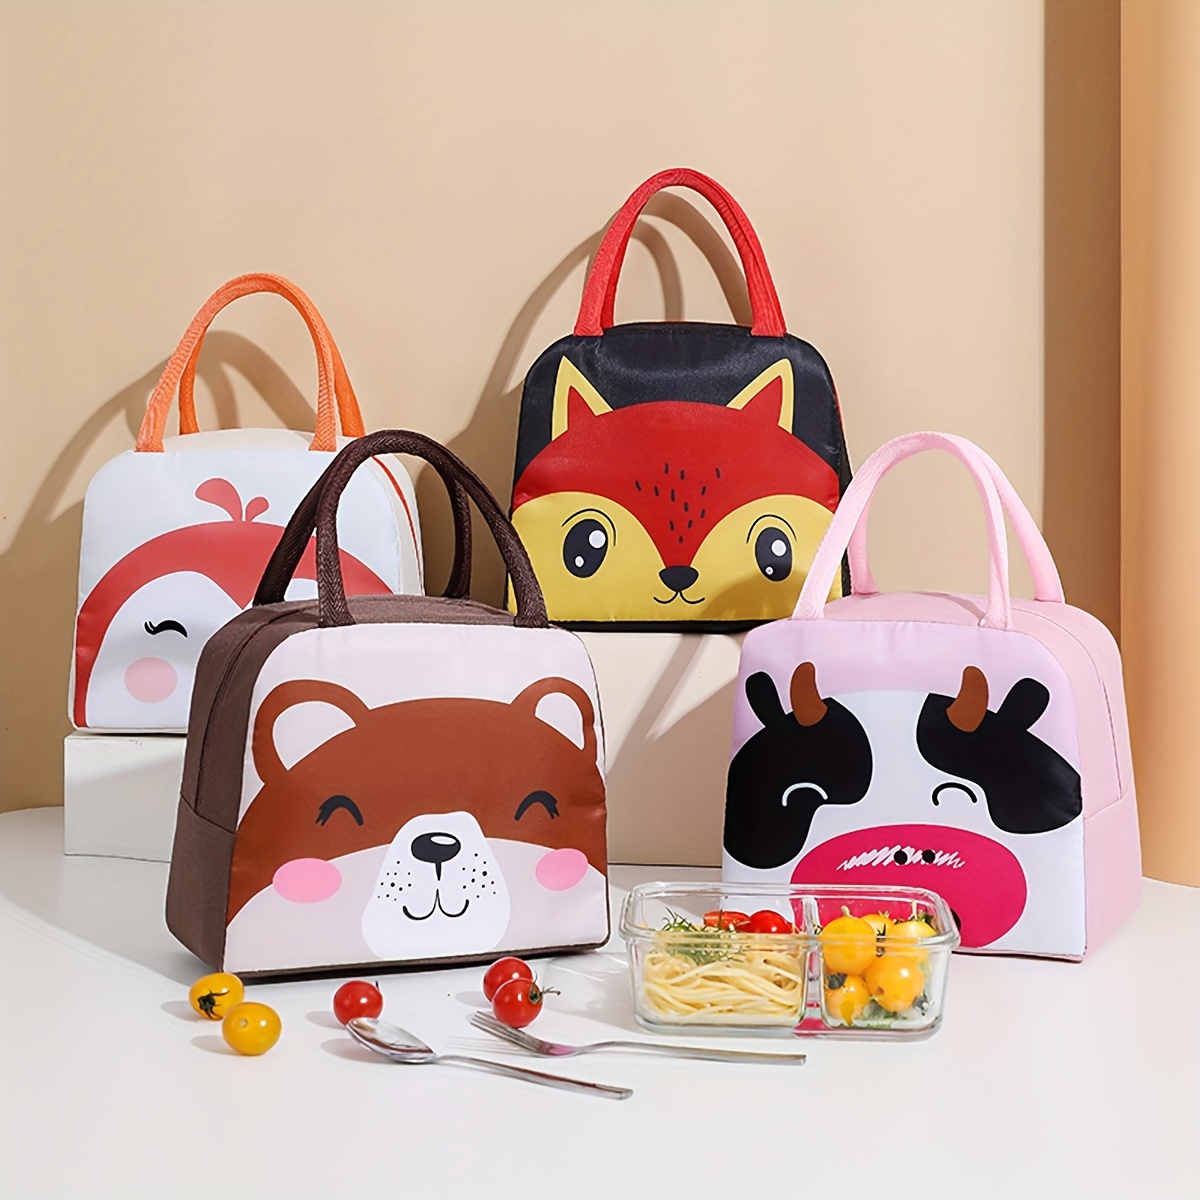 

Cute Cartoon Animals Print Lunch Bag, Waterproof & Thermal Insulation Bag, Portable Storage Bag For Picnic